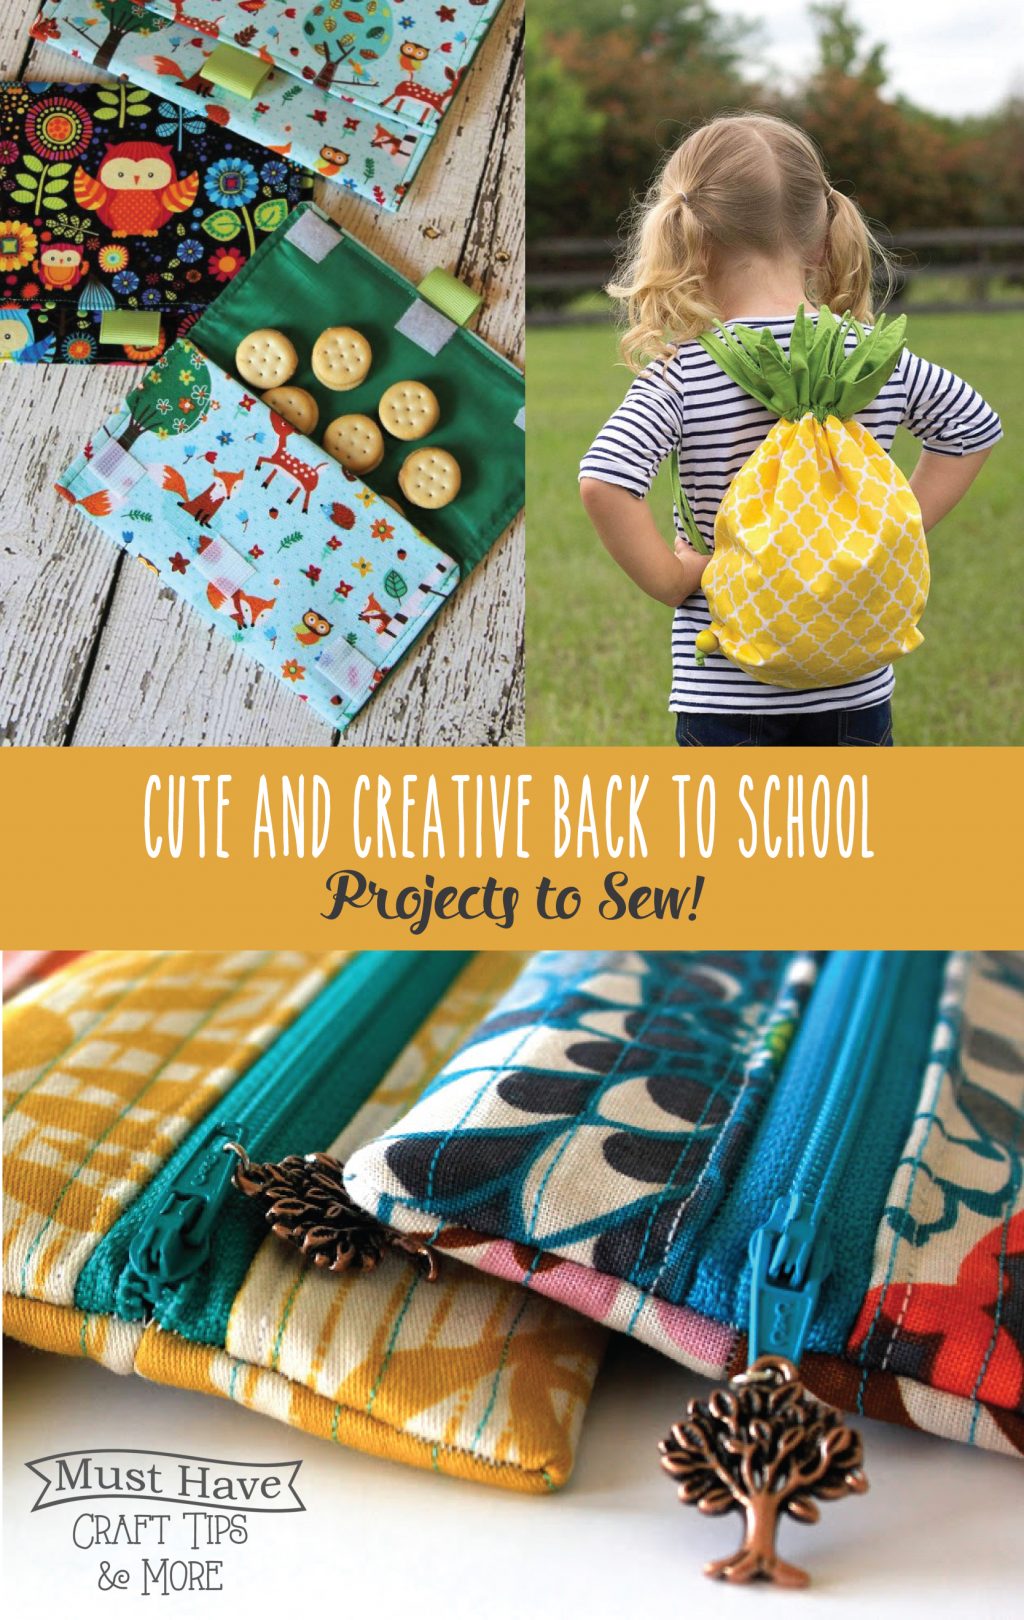 Save some money on back to school supplies by sewing your own!